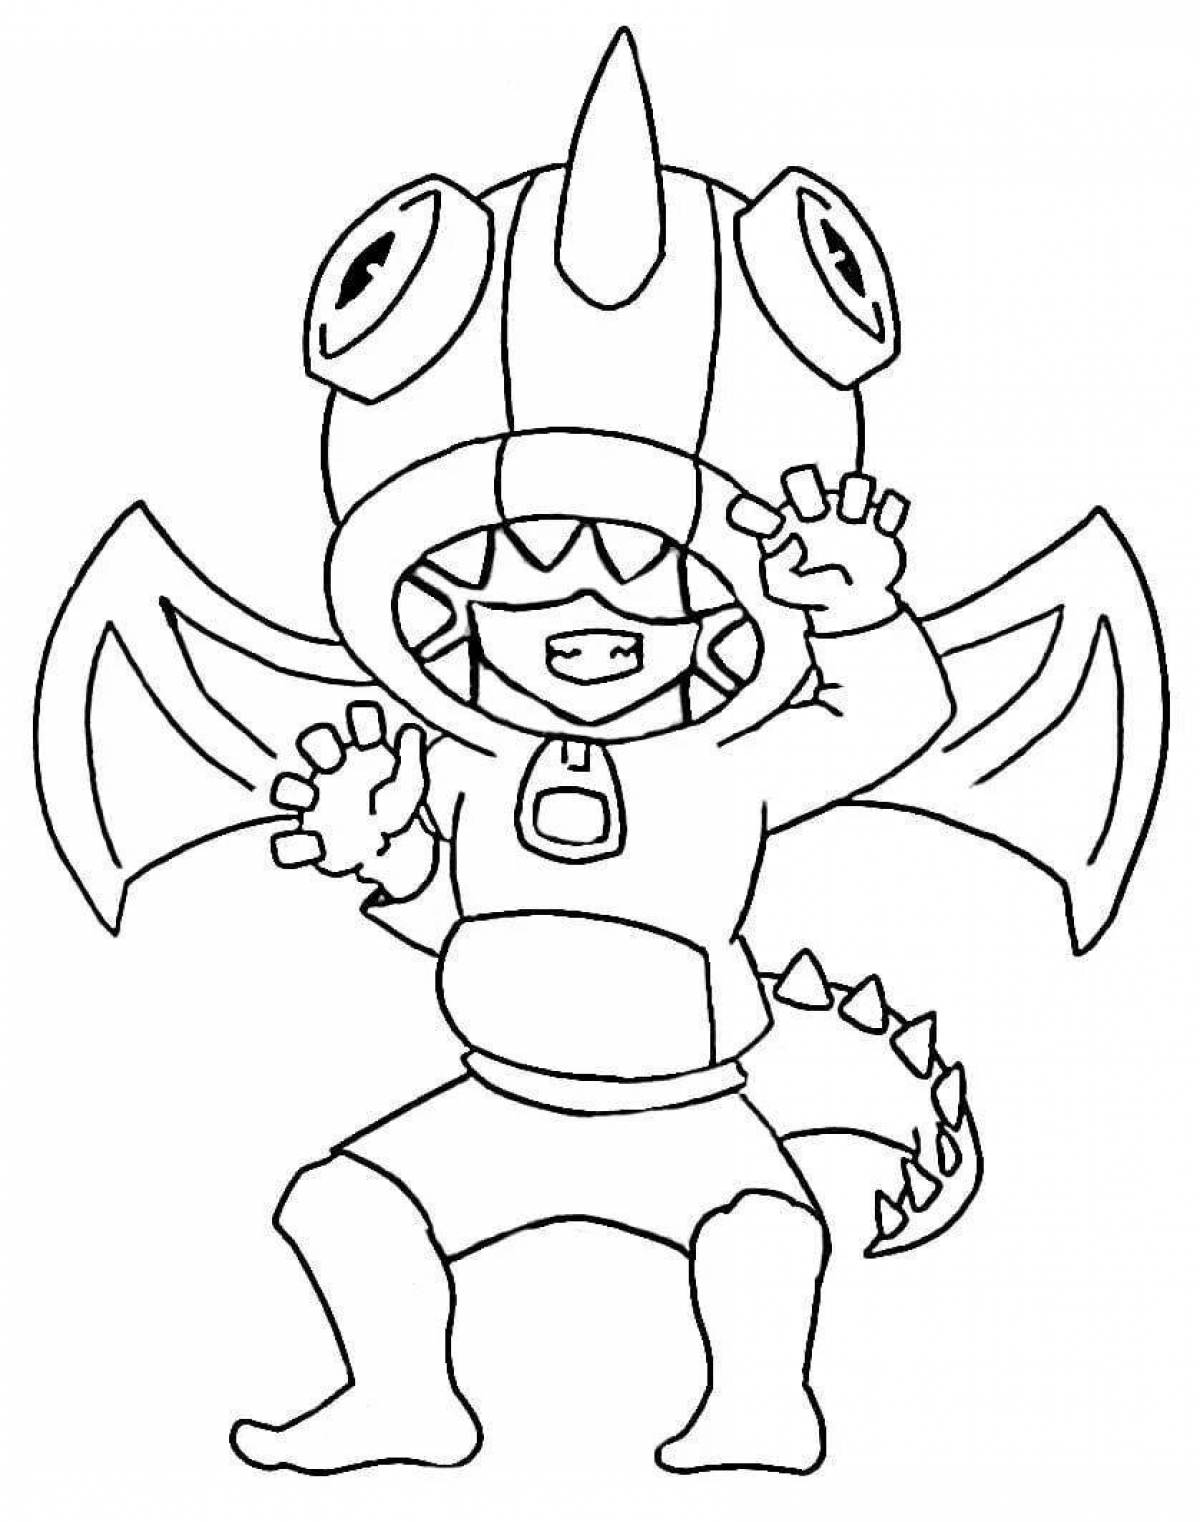 Colorful leon shark coloring page